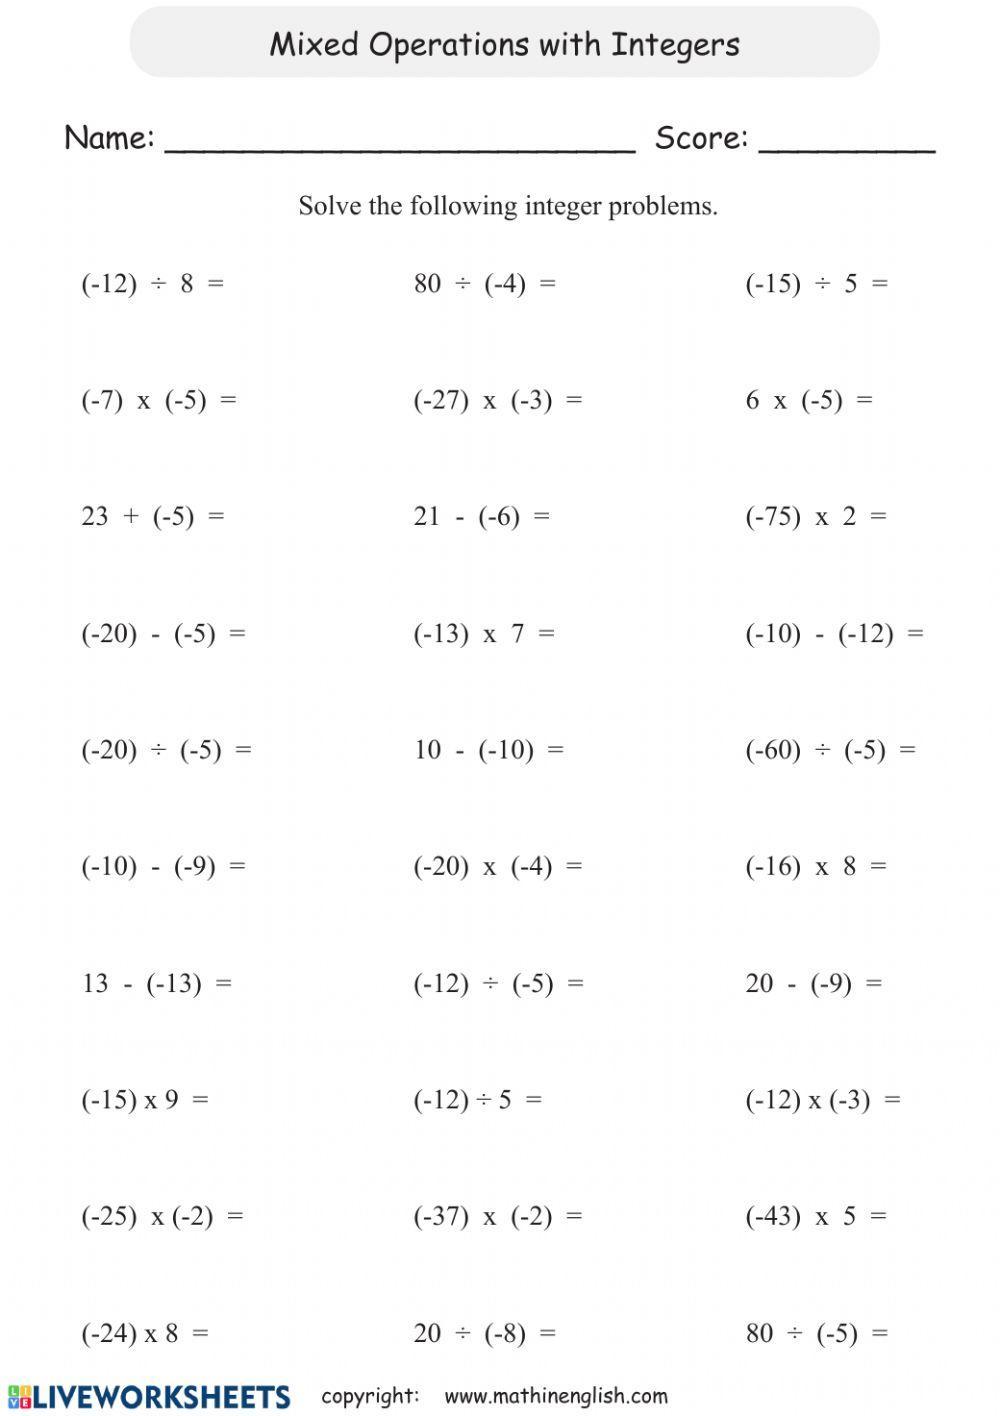 Operations with Integers